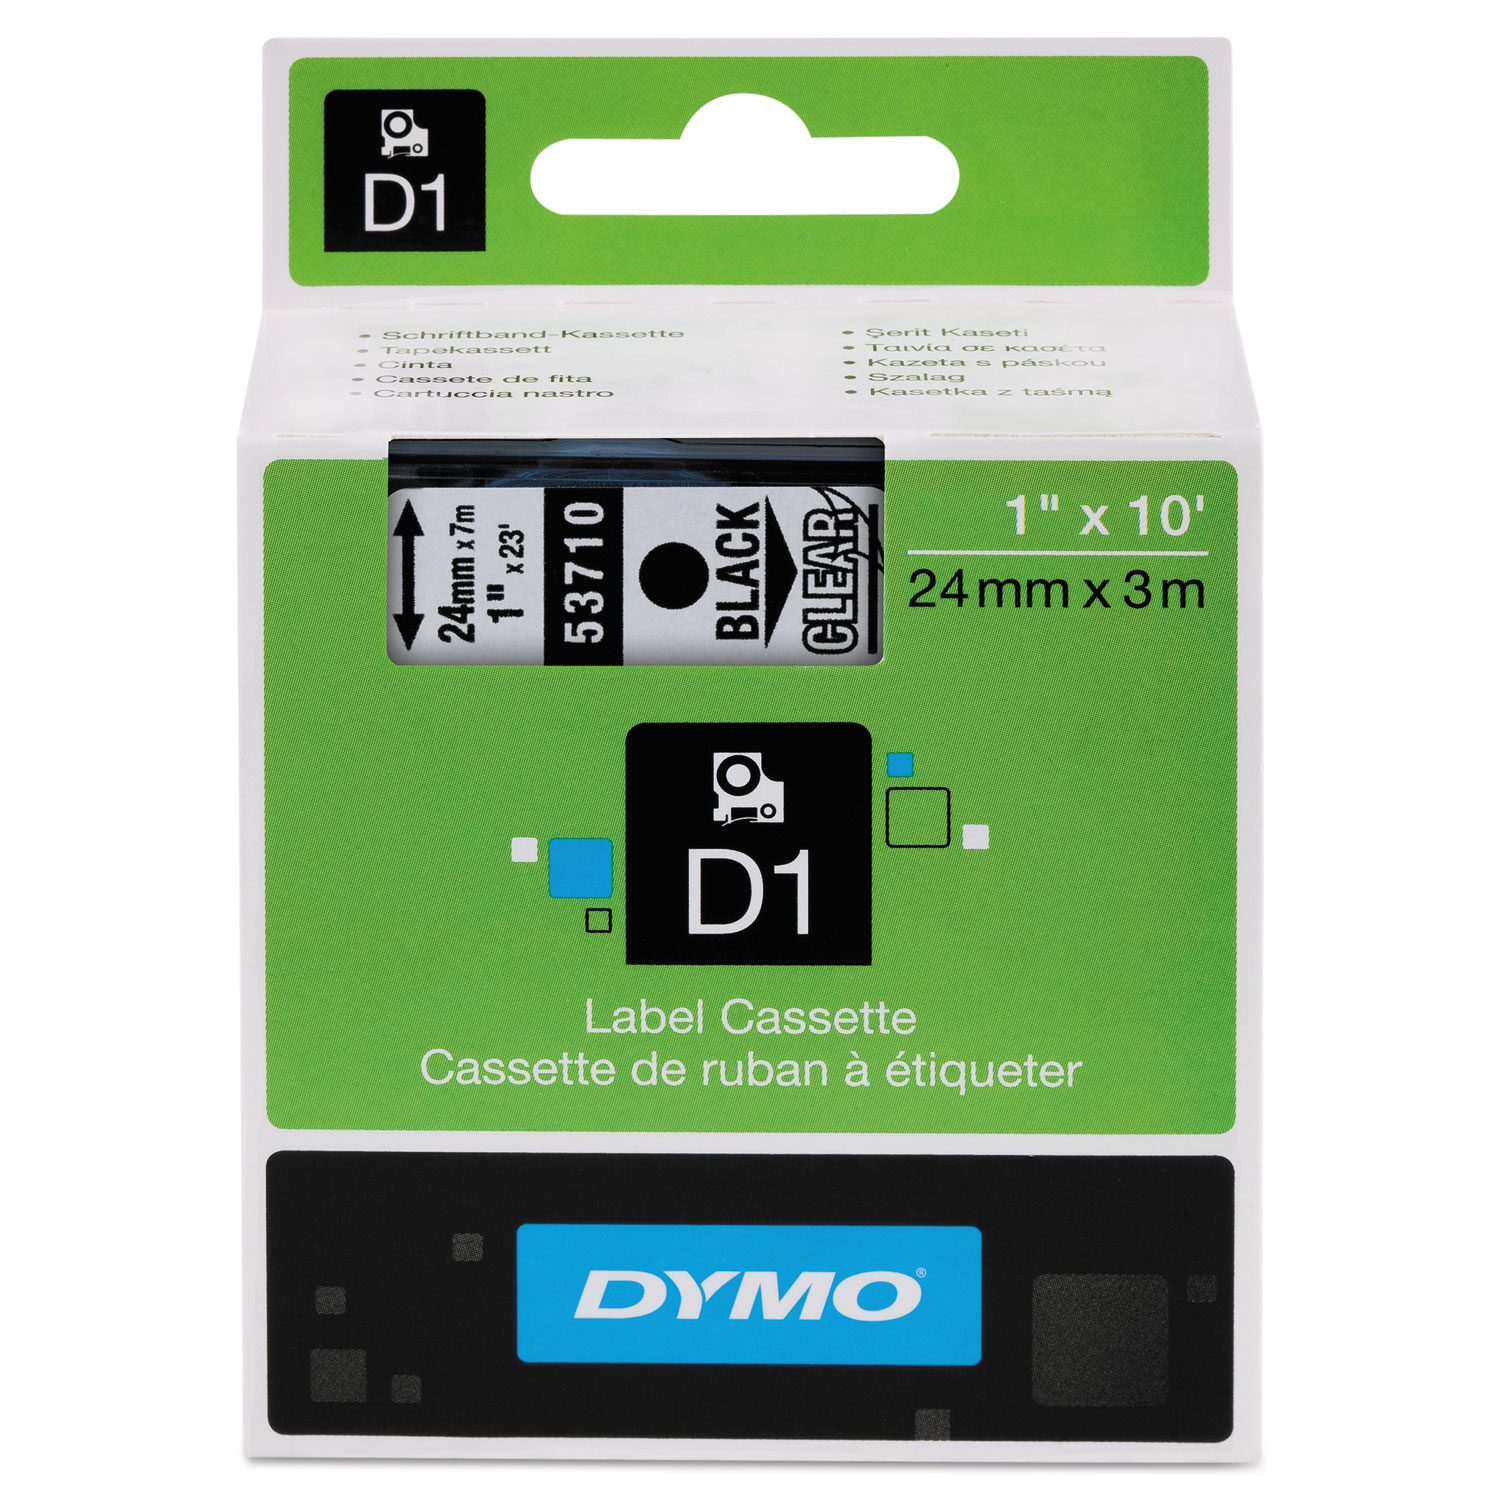  DYMO 53710 D1 High-Performance Polyester Removable Label Tape, 1 x 23 ft, Black on Clear (DYM53710) 